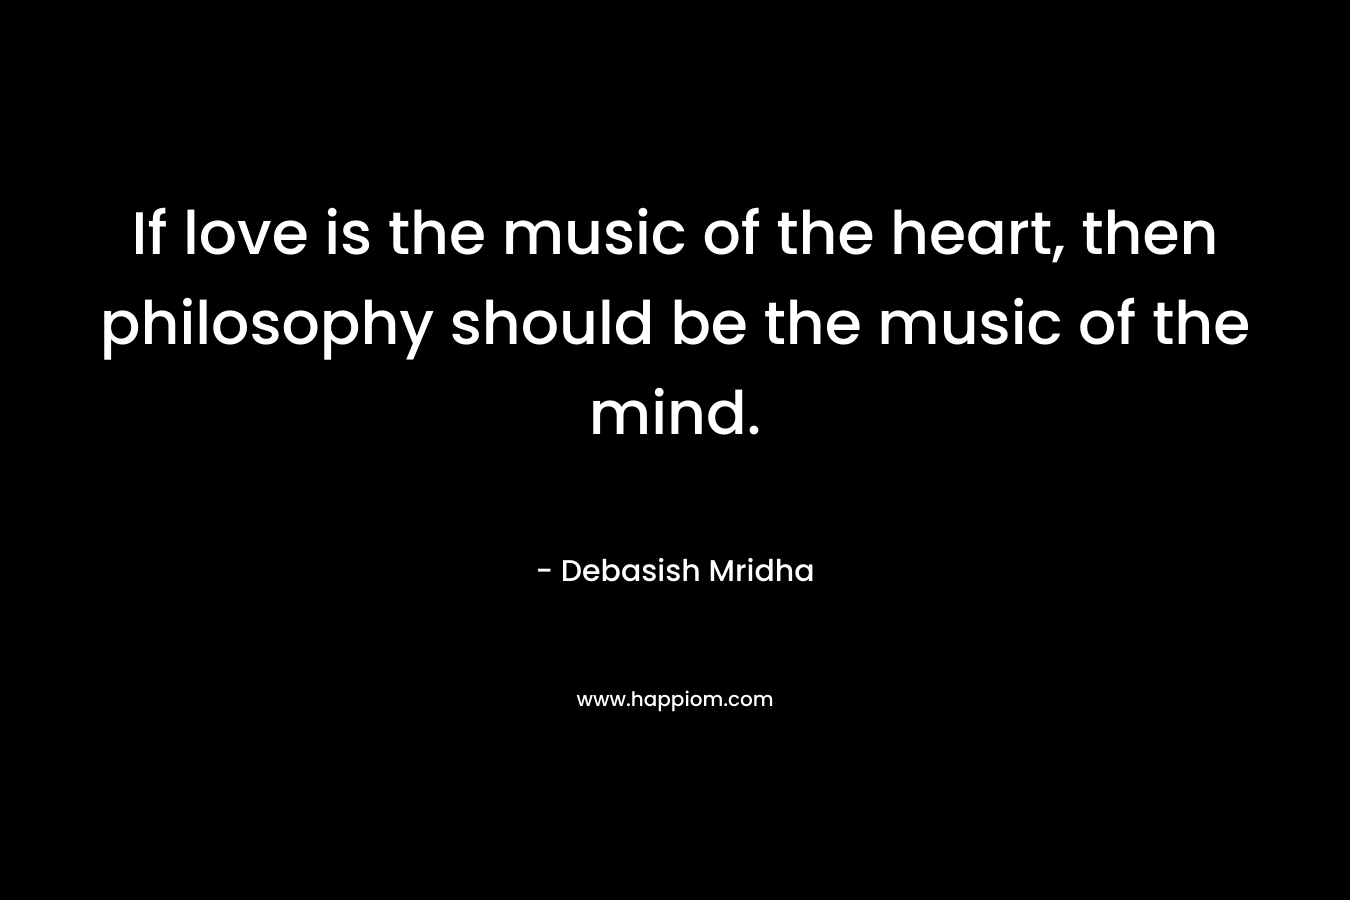 If love is the music of the heart, then philosophy should be the music of the mind.